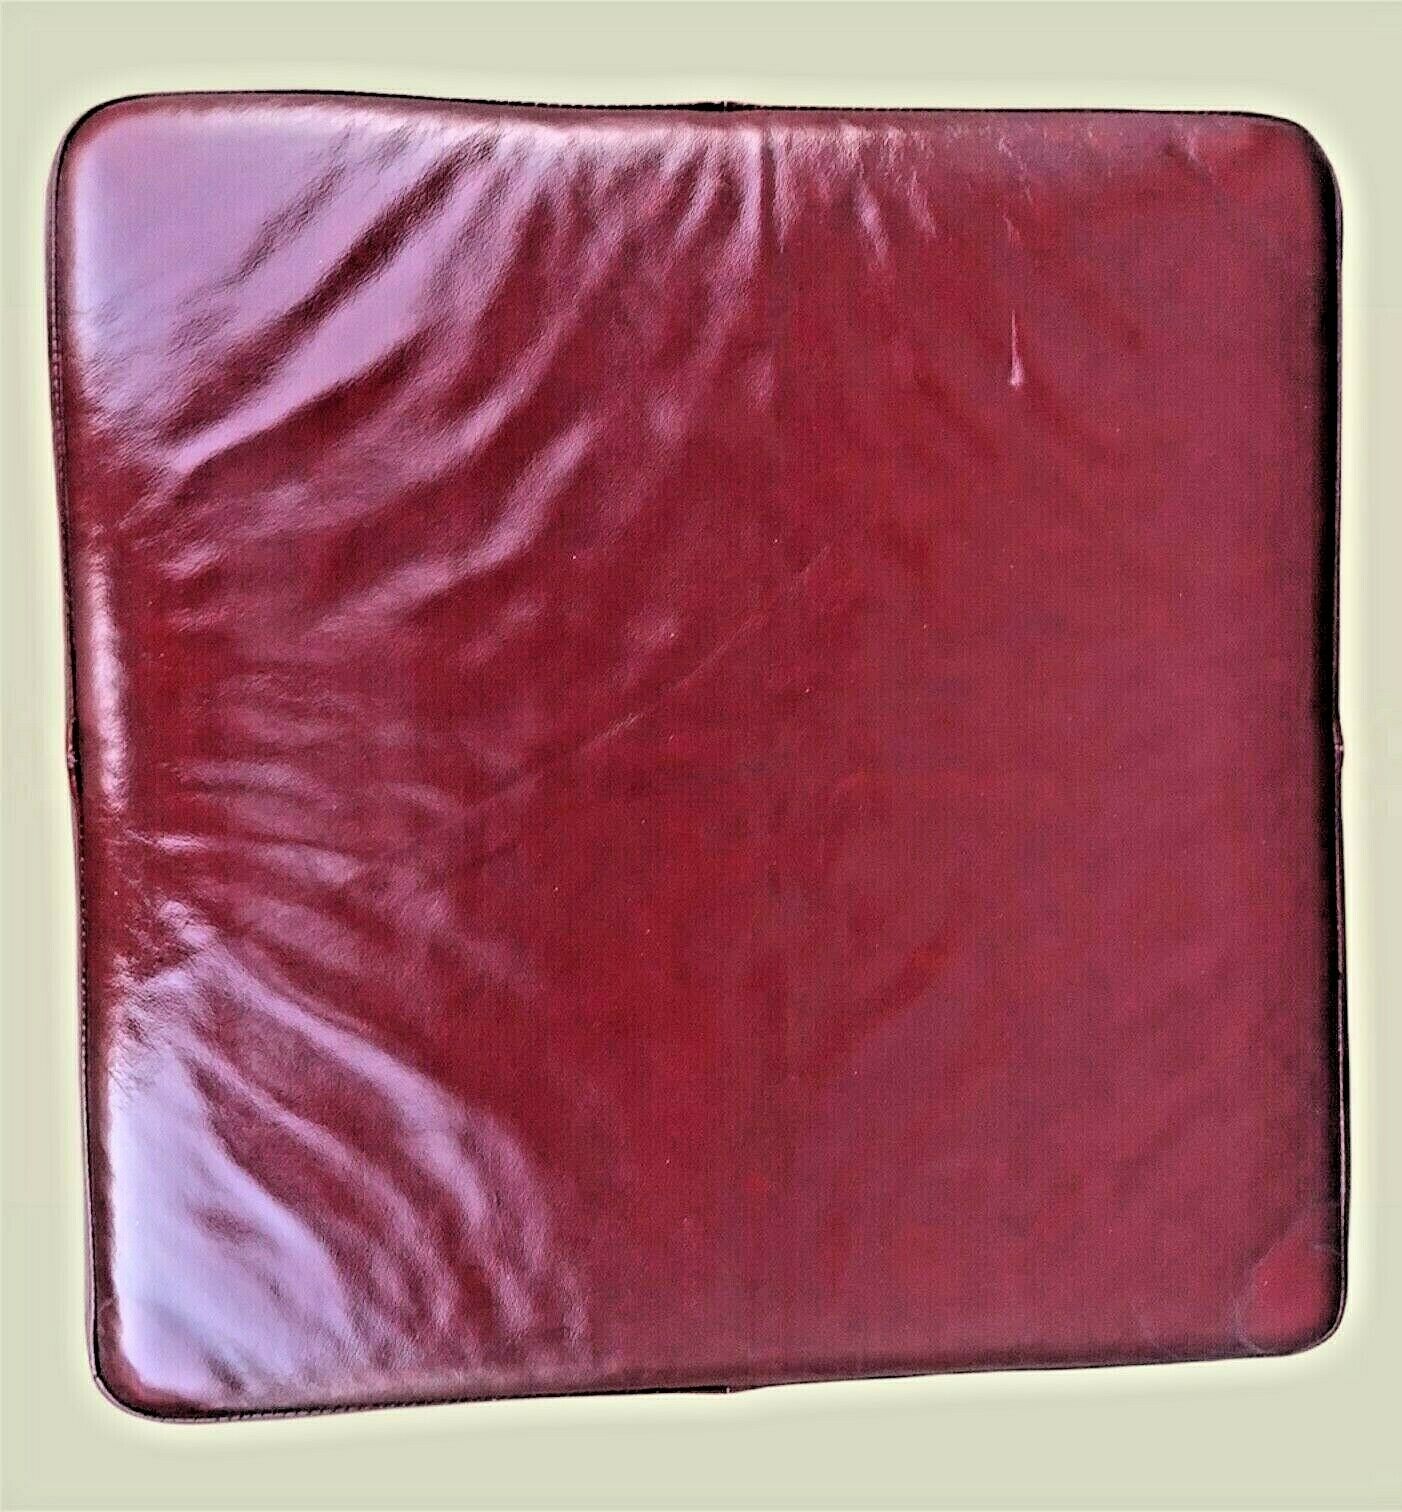 023.....Superior Quality Vintage Red Leather Footstool ( sold )